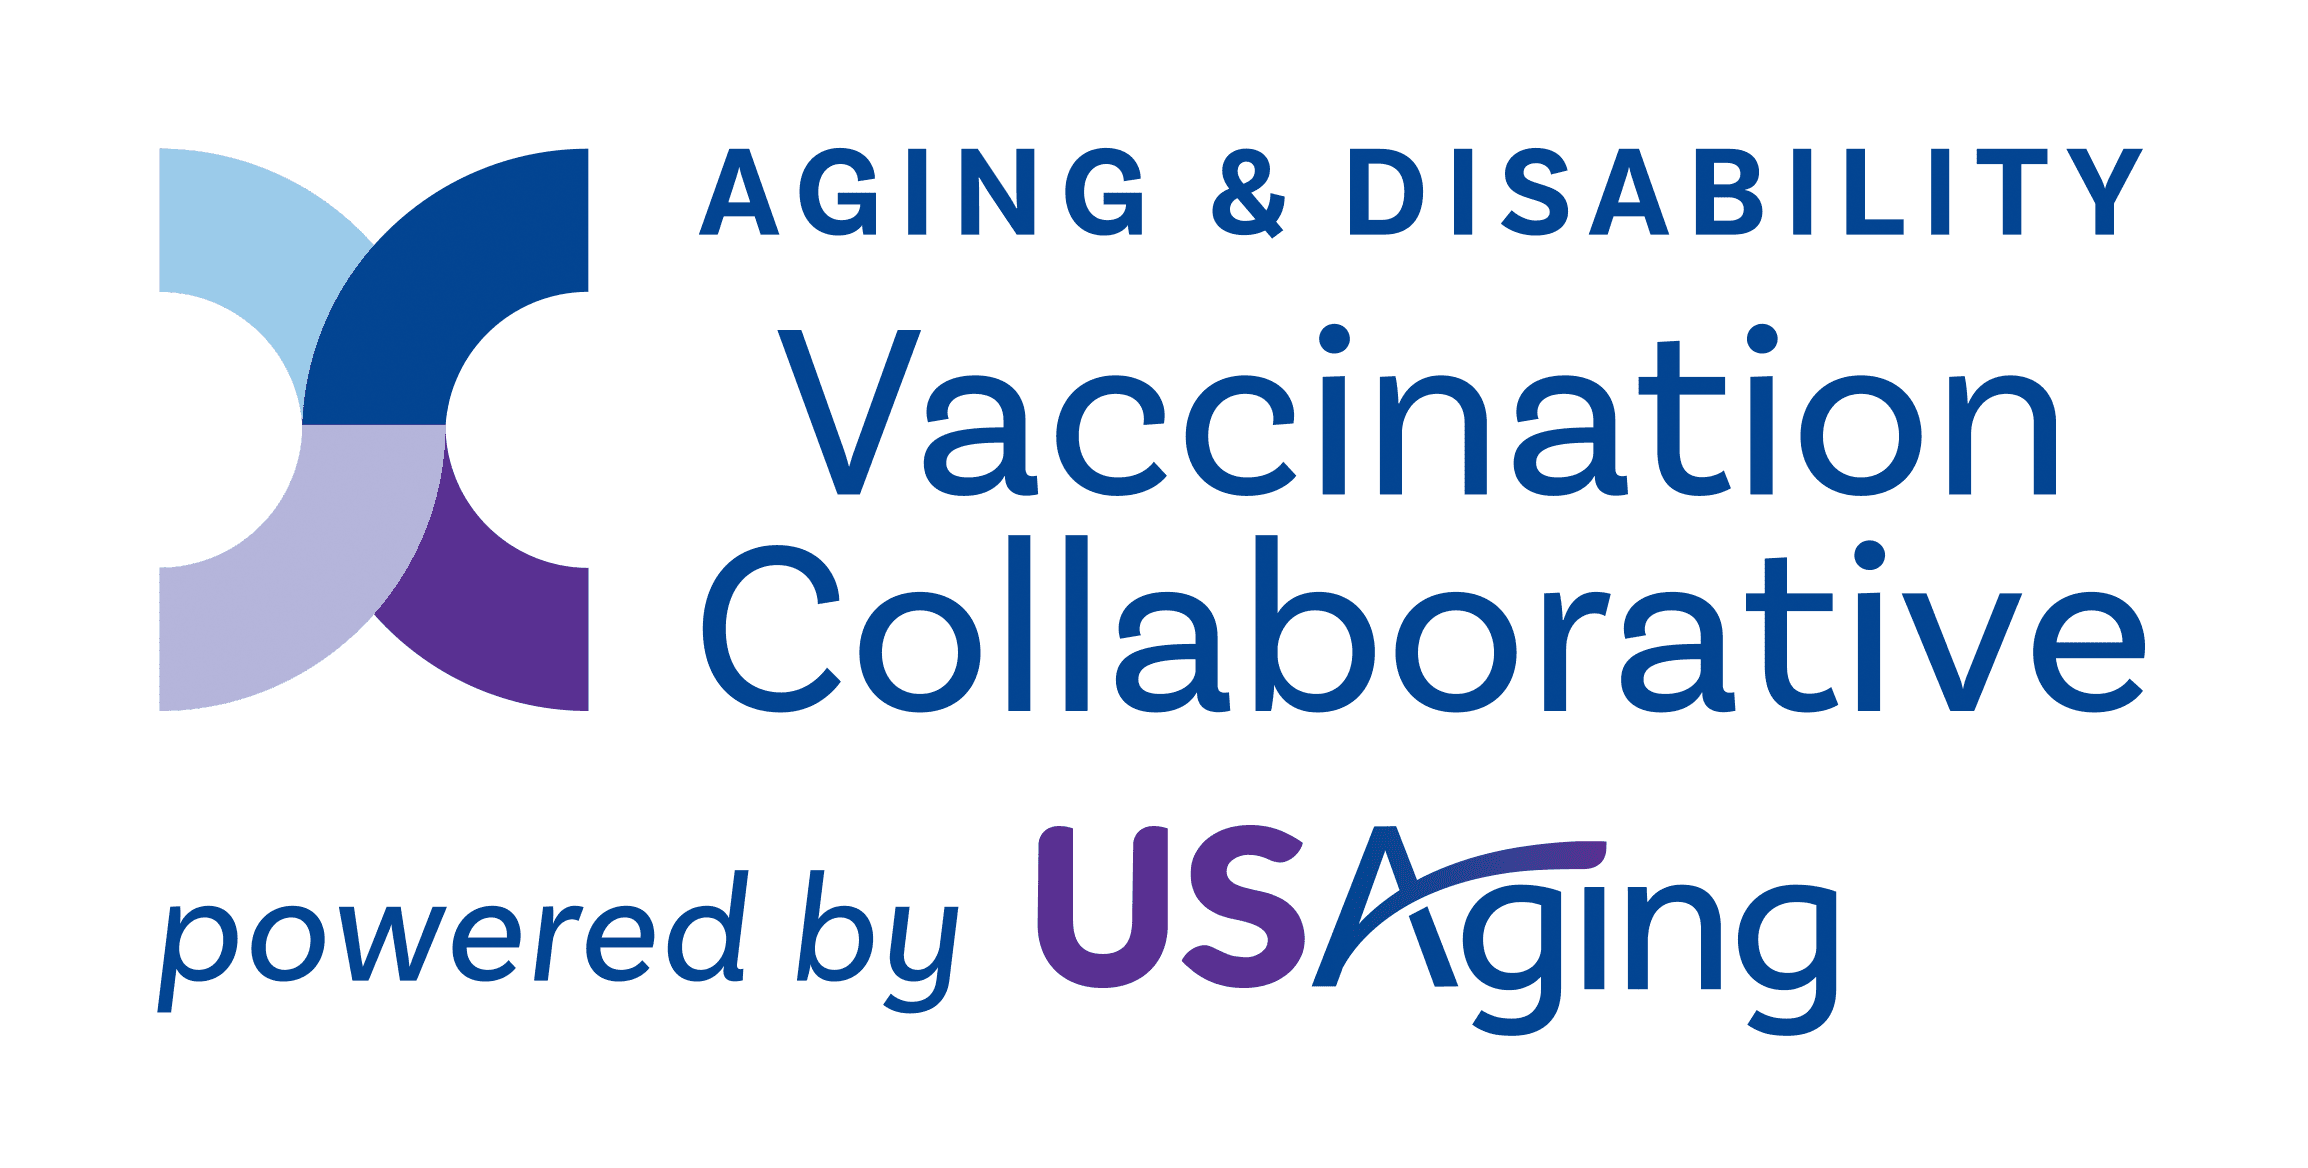 Logo: Aging & Disability Vaccination Collaborative Powered by USAging